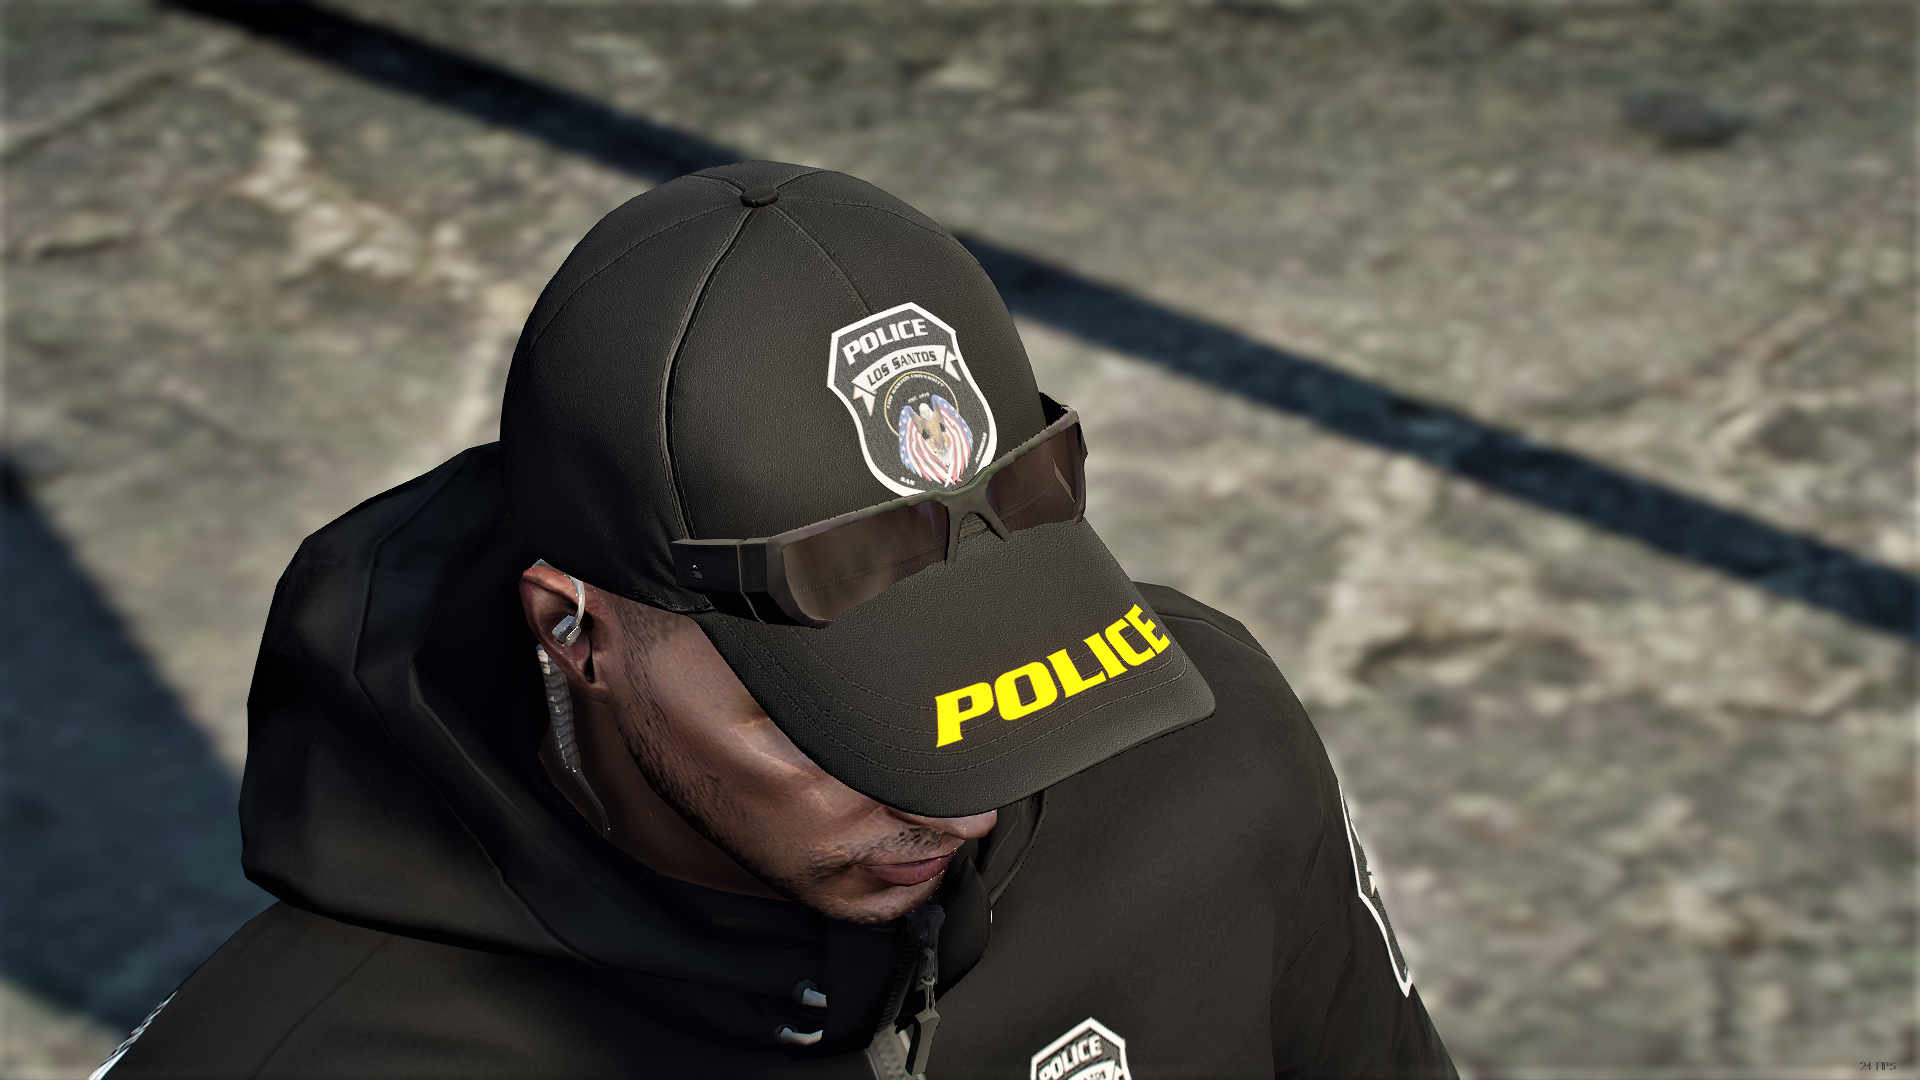 Grand_Theft_Auto_V_24_02_2022_16_15_28.png